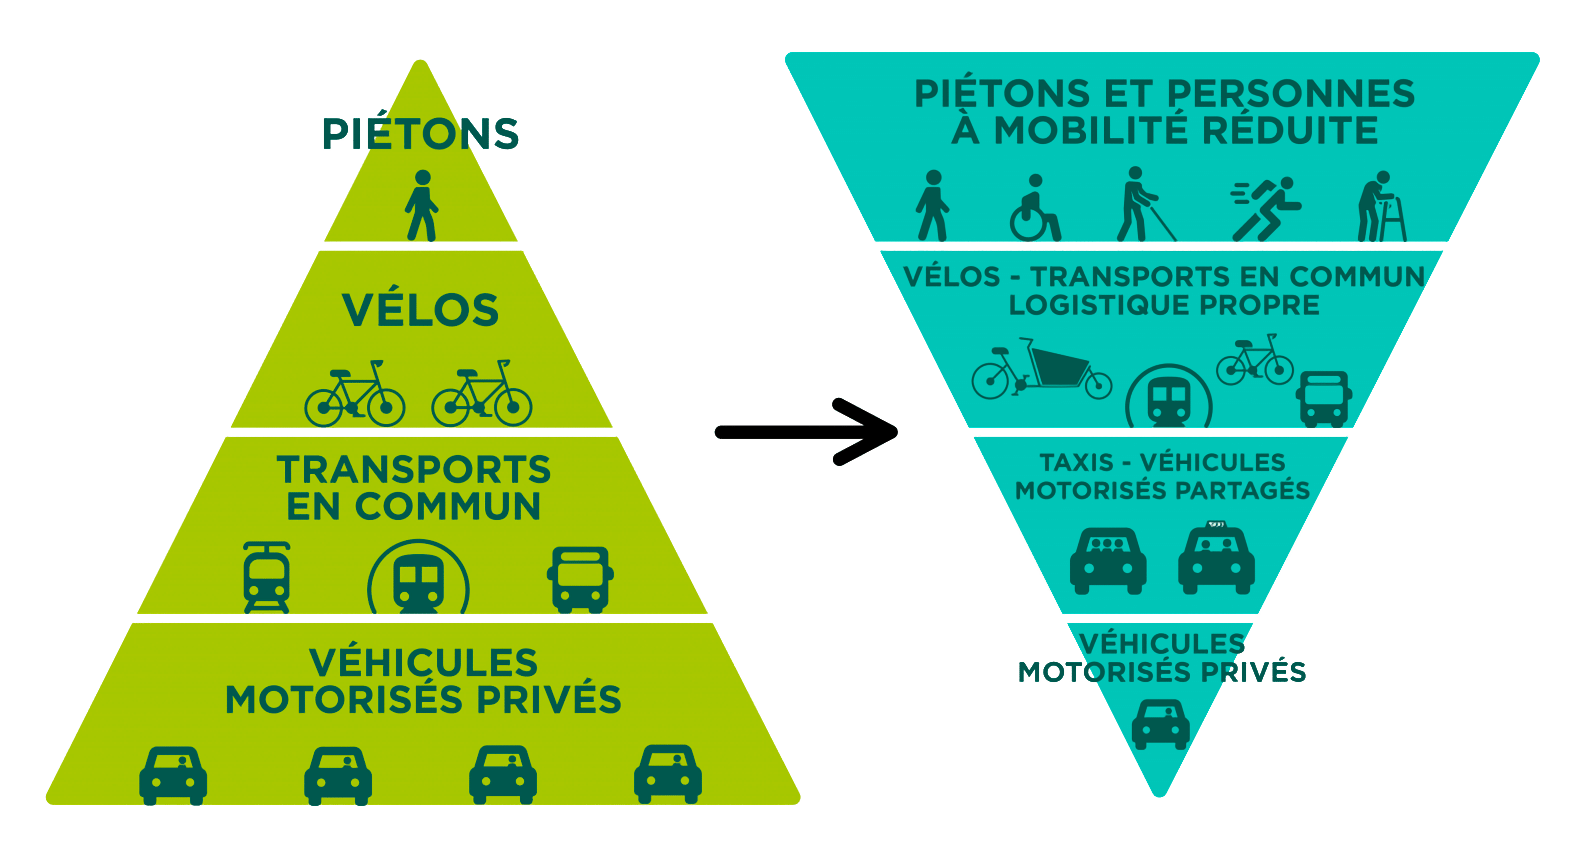 Graphic showing the transition between two paradigms of transportation. On the left is the old paradigm represented by a lone pedestrian, bikes, transit and many cars. On the right is the new urbanist paradigm. It shows many pedestrians at the top, including a jogger, a person holding a white cane, and others using mobility aids. Below it is a bike, cargo bike, transit, ride share and a single passenger car at the bottom.